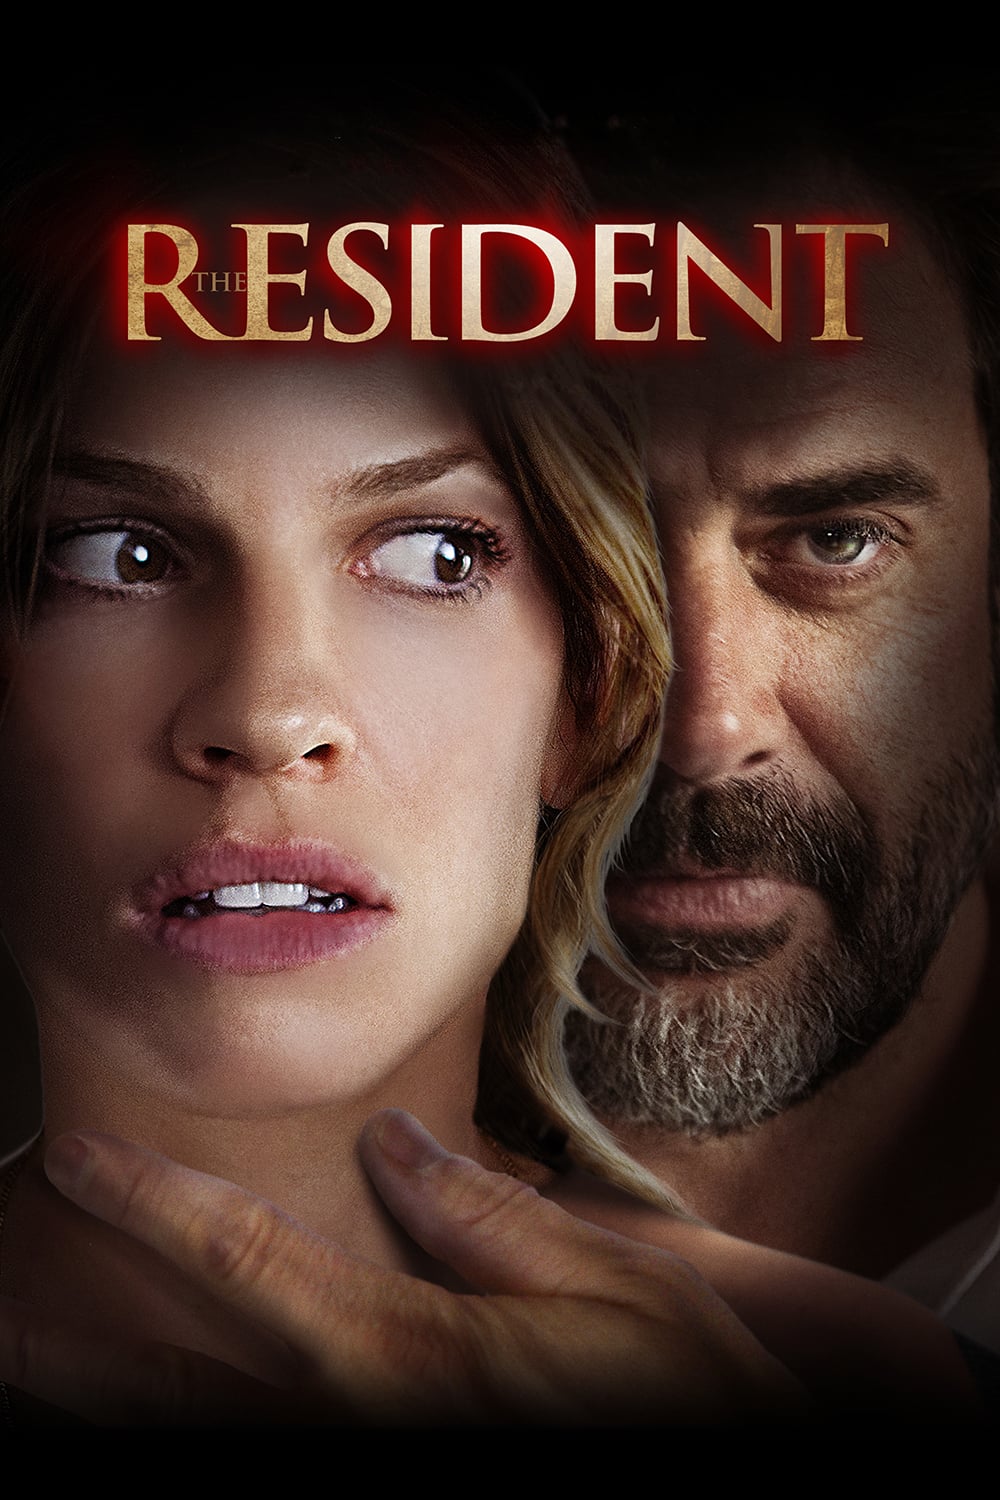 The Resident [HD] (2011)